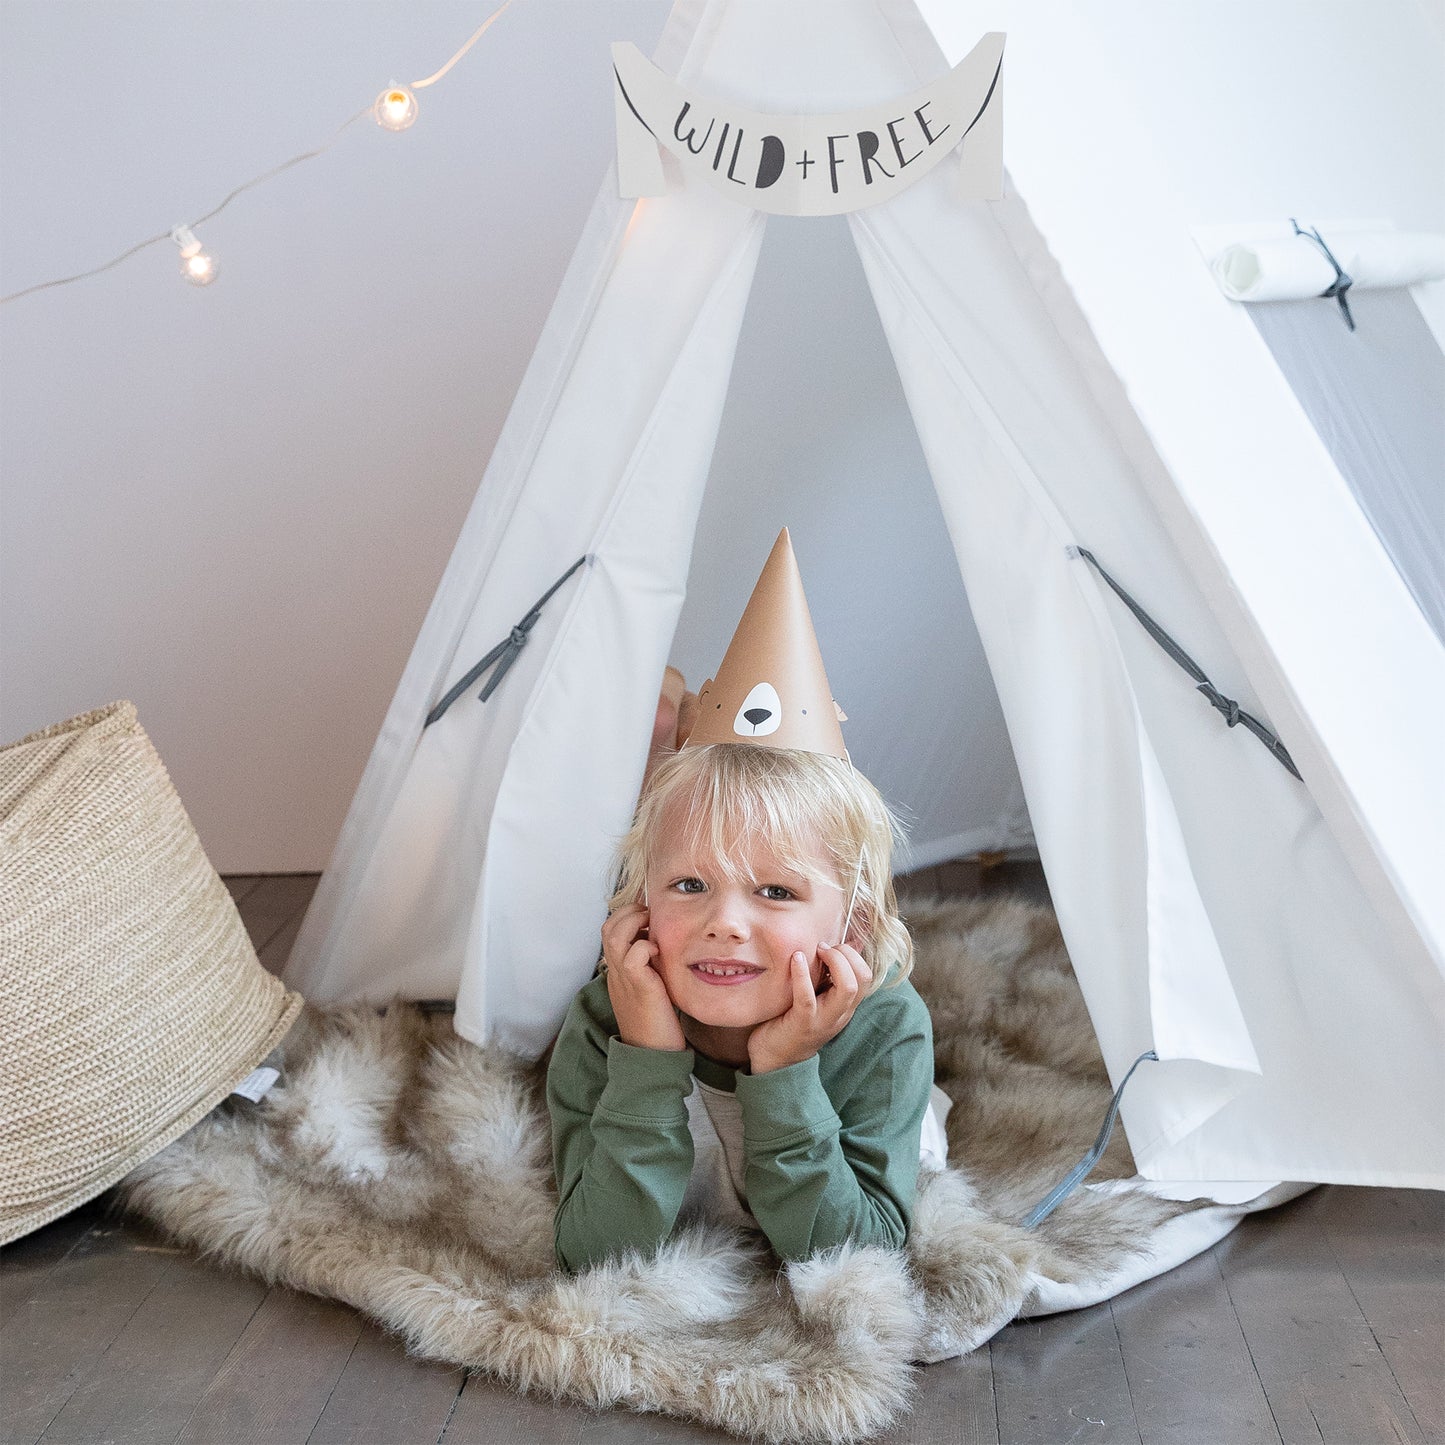 camping theme for children's party